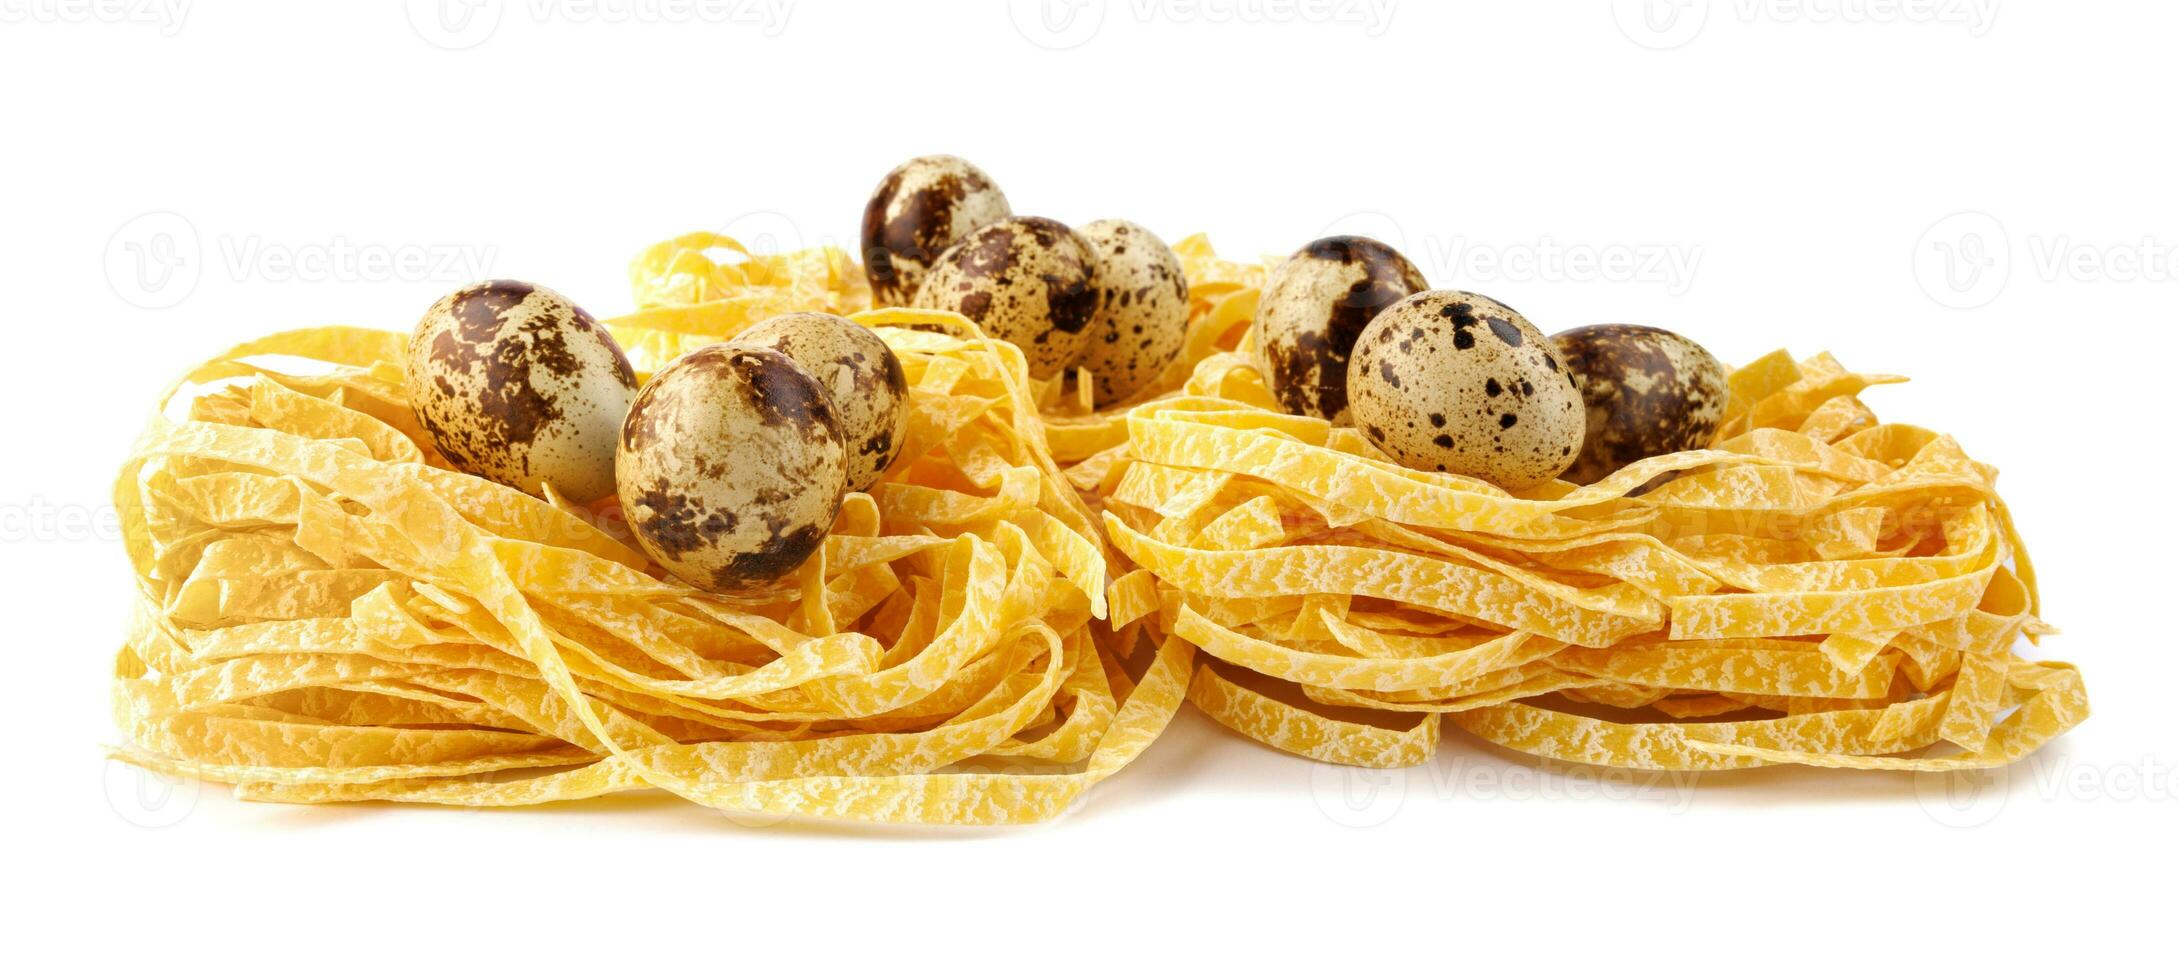 Nests of Italian pasta with quail eggs inside isolated on white background. photo